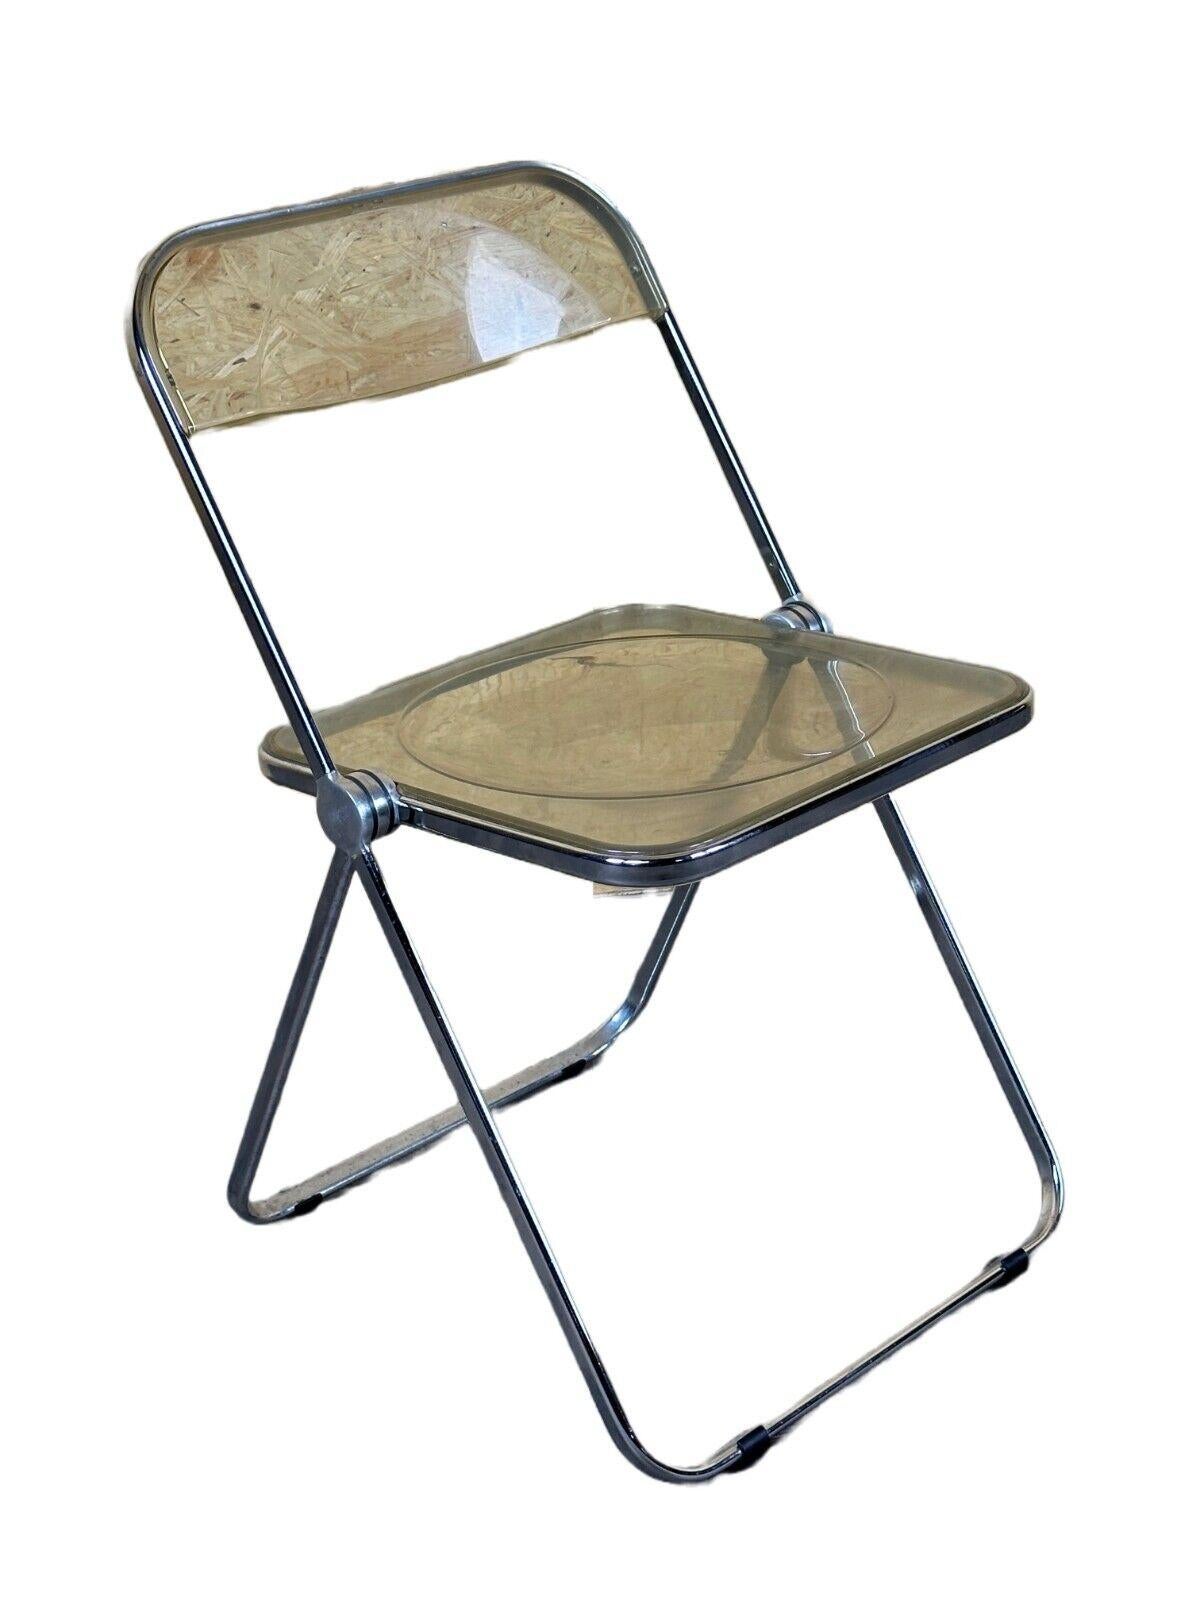 60s 70s chair folding chair plexiglass G.Piretti for A.Castelli Plia Italy

Object: folding chair

Manufacturer: Castelli, Italy

Condition: good - vintage

Age: around 1960-1970

Dimensions:

Width = 47cm
Depth = 48cm
Height = 75cm
Seat height =